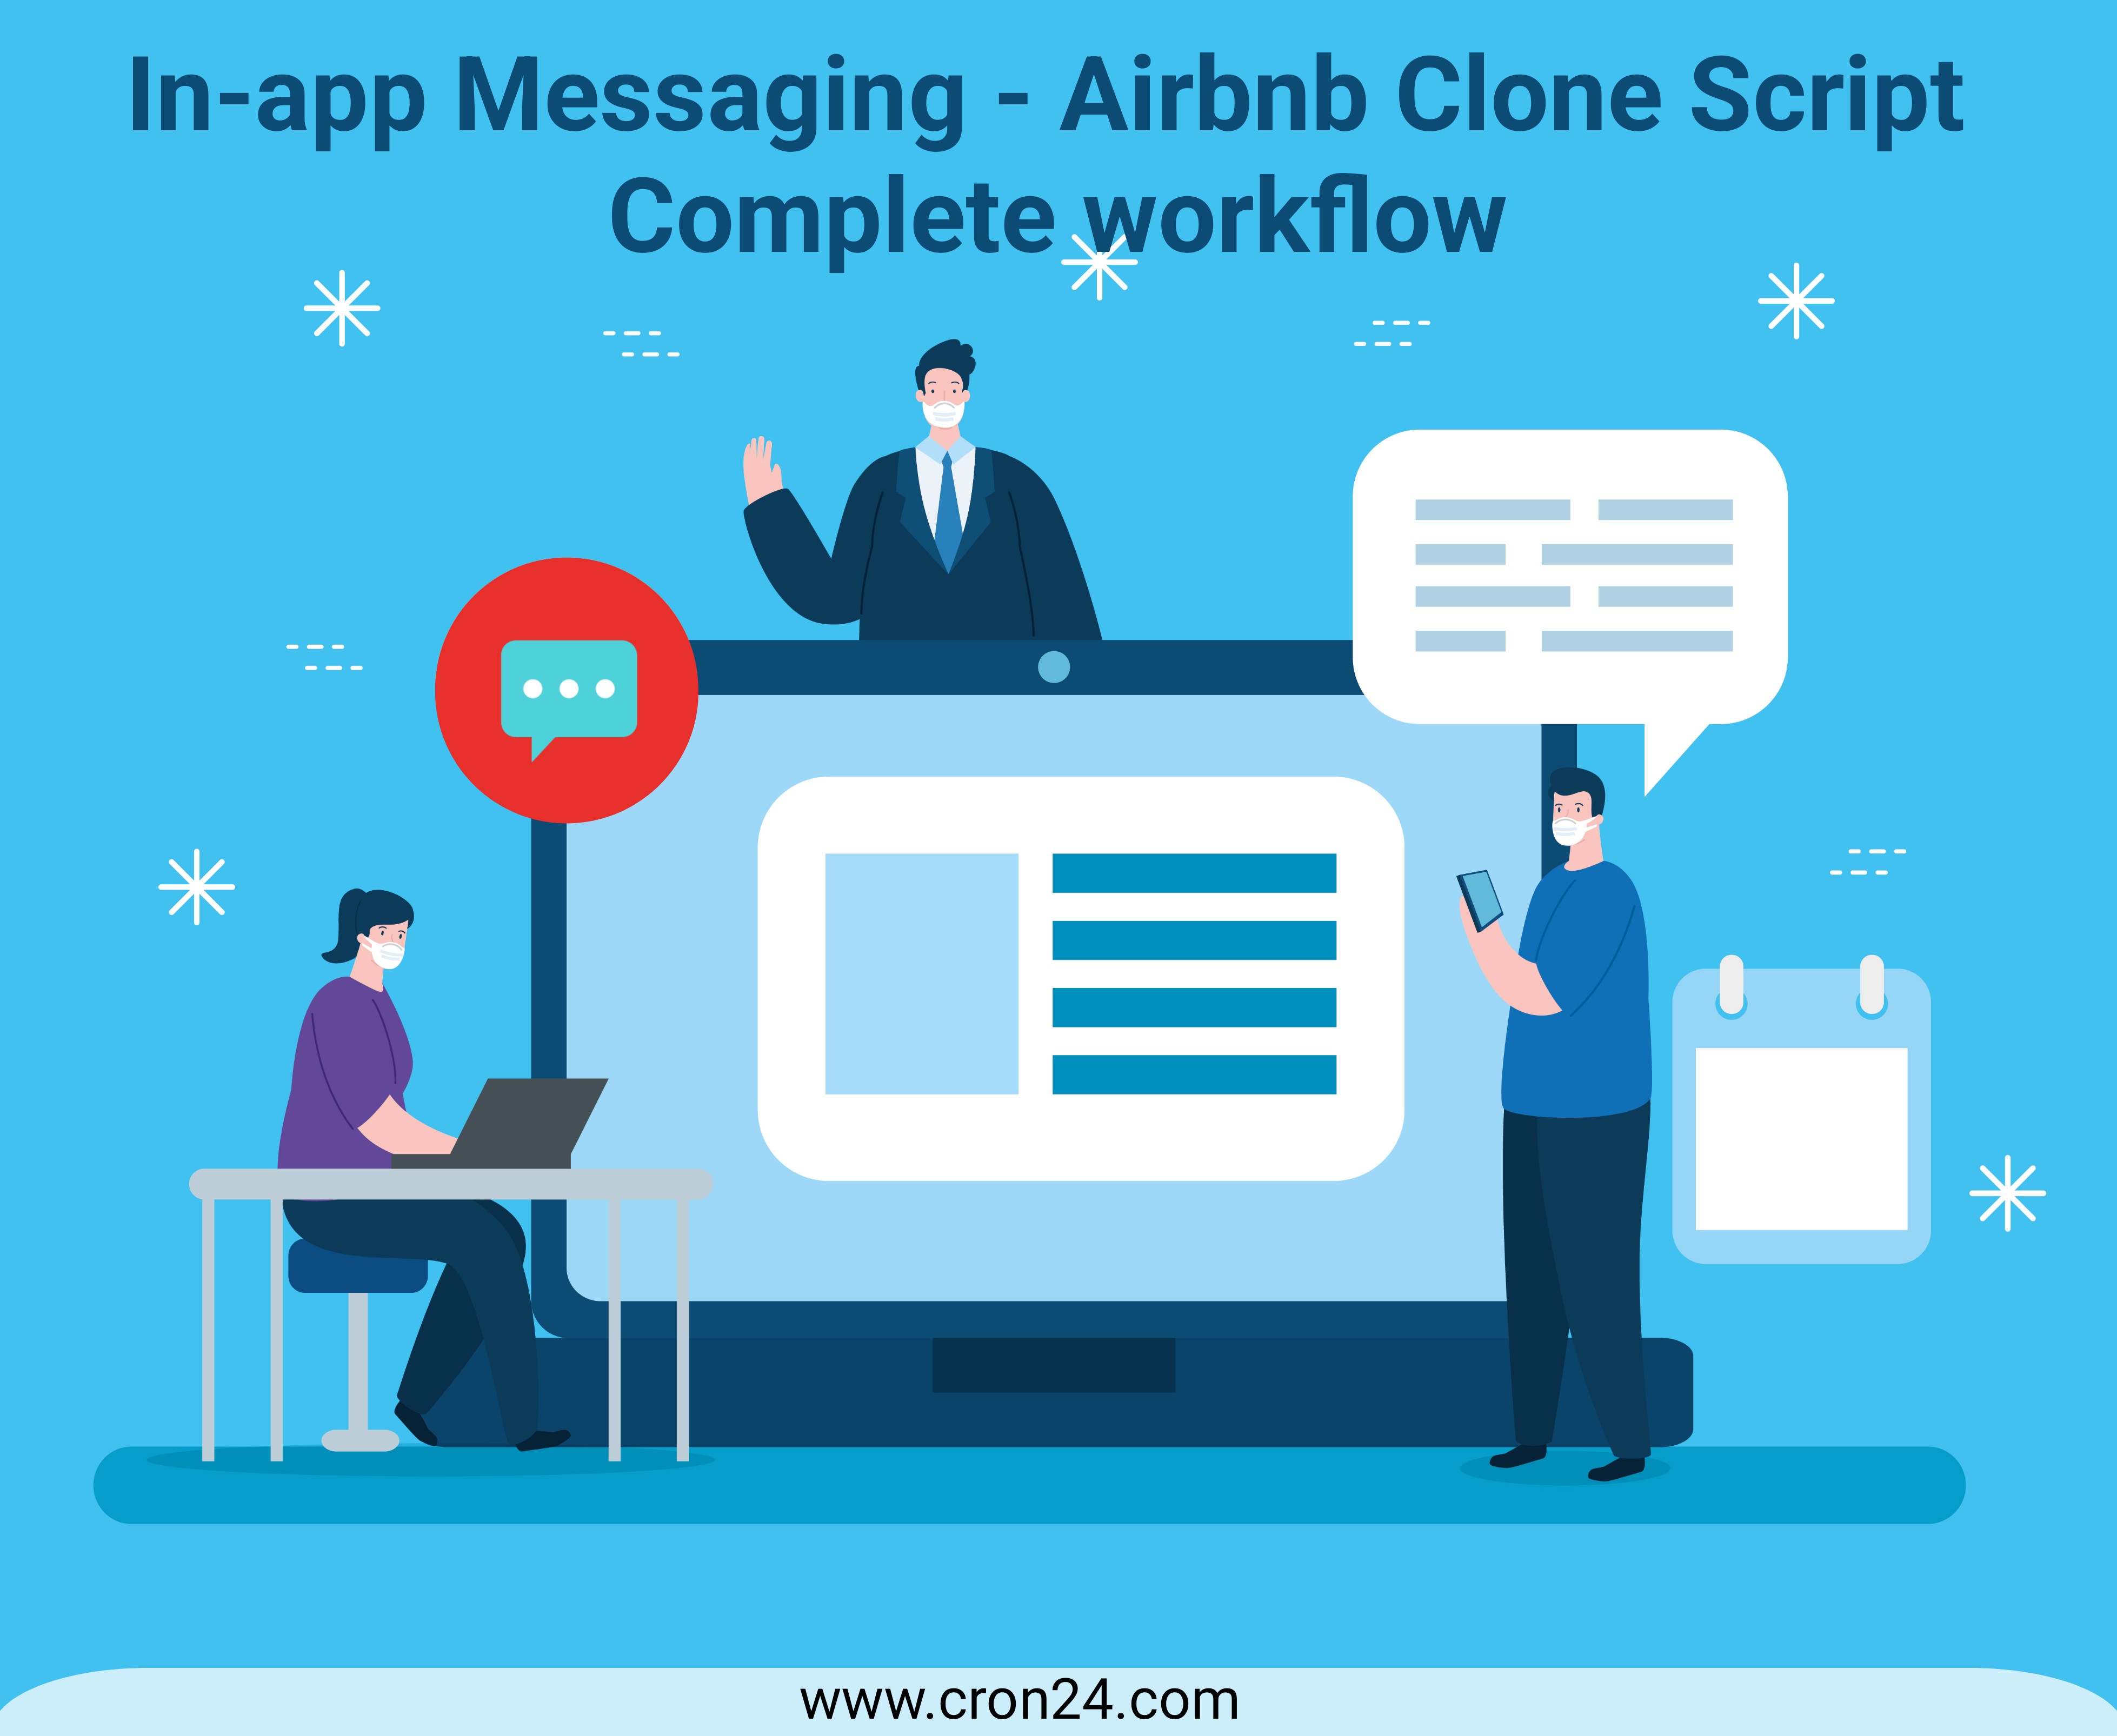 The Complete Workflow of In-App Messaging Feature in Airbnb Clone Script